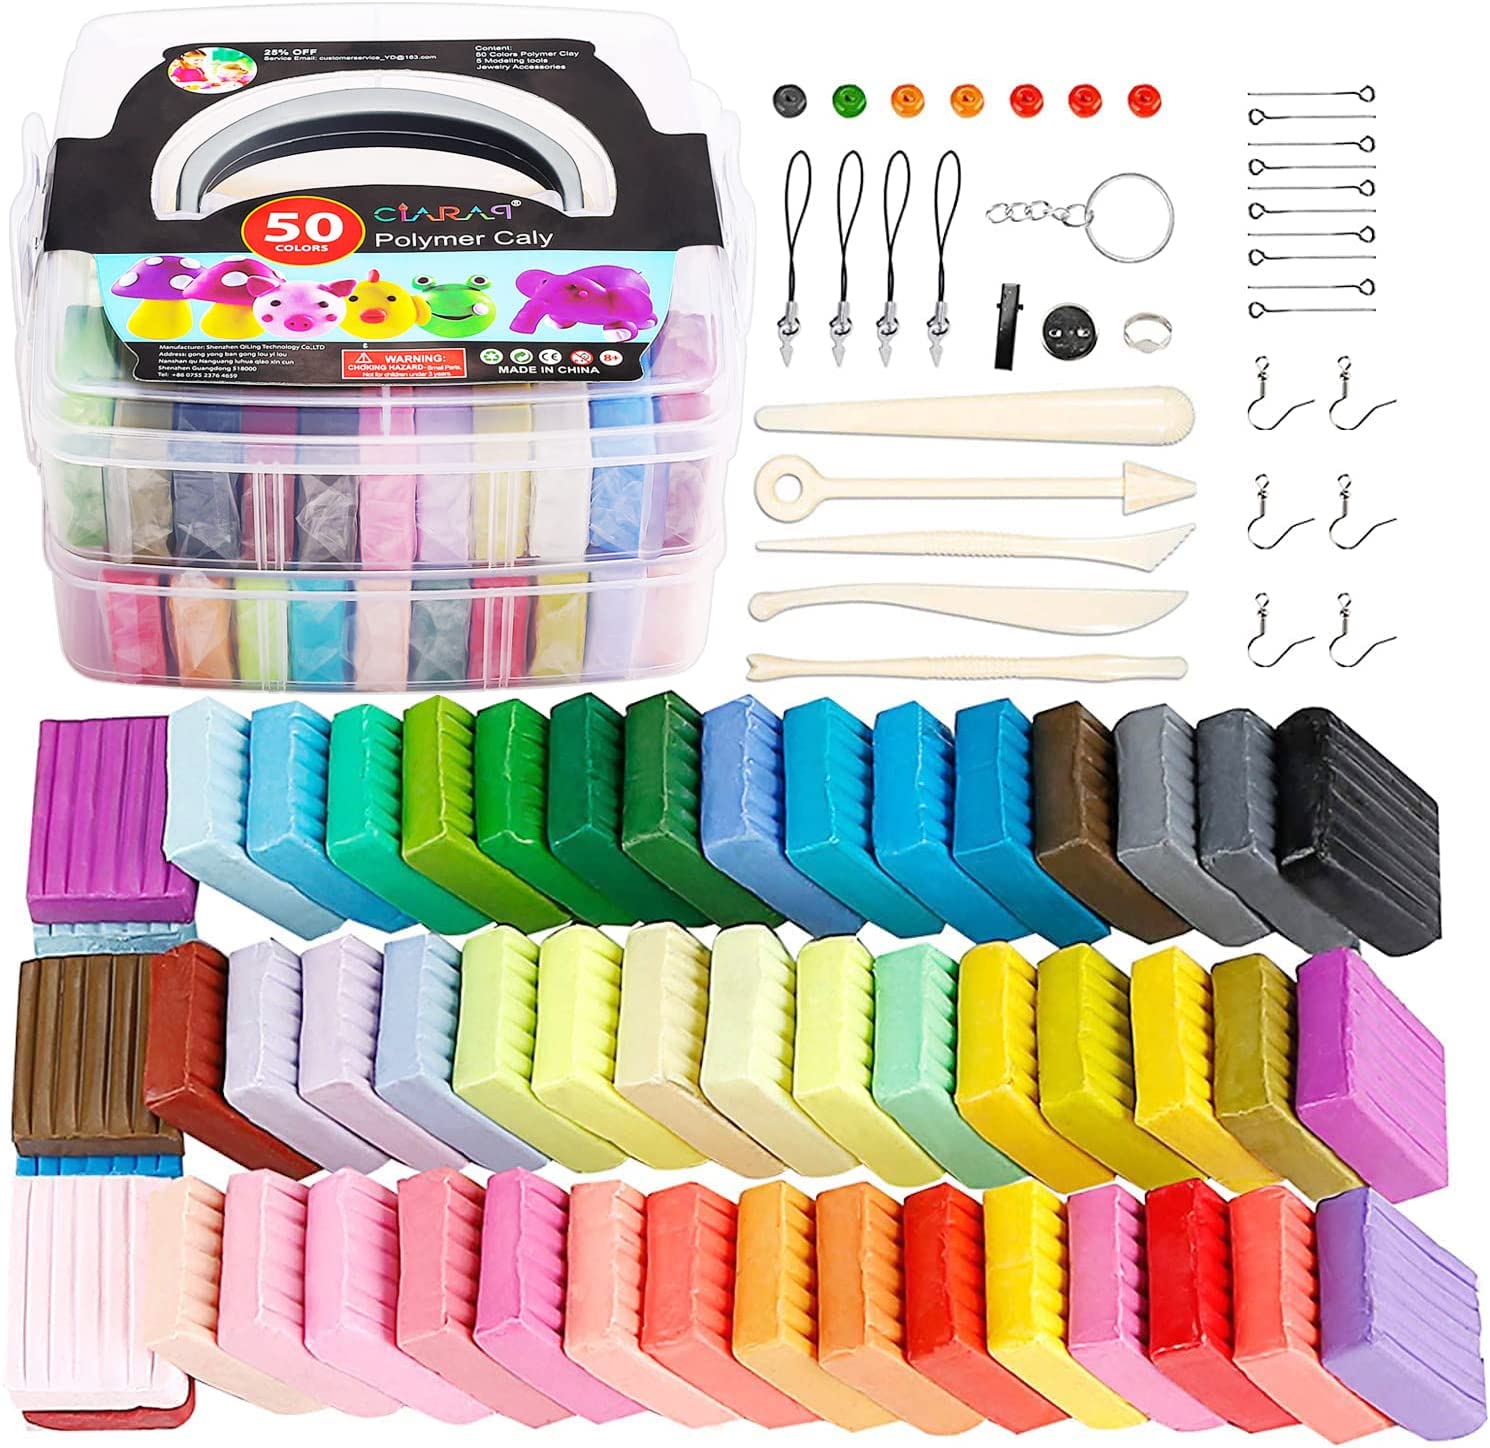 Polymer Clay Starter Kit, 50 Colors Oven Bake Clay with 8 pcs Modeling  Tools and 30 Jewelry Accessories, Safe and Nontoxic DIY Baking Clay Blocks  Accessories. : : Home & Kitchen